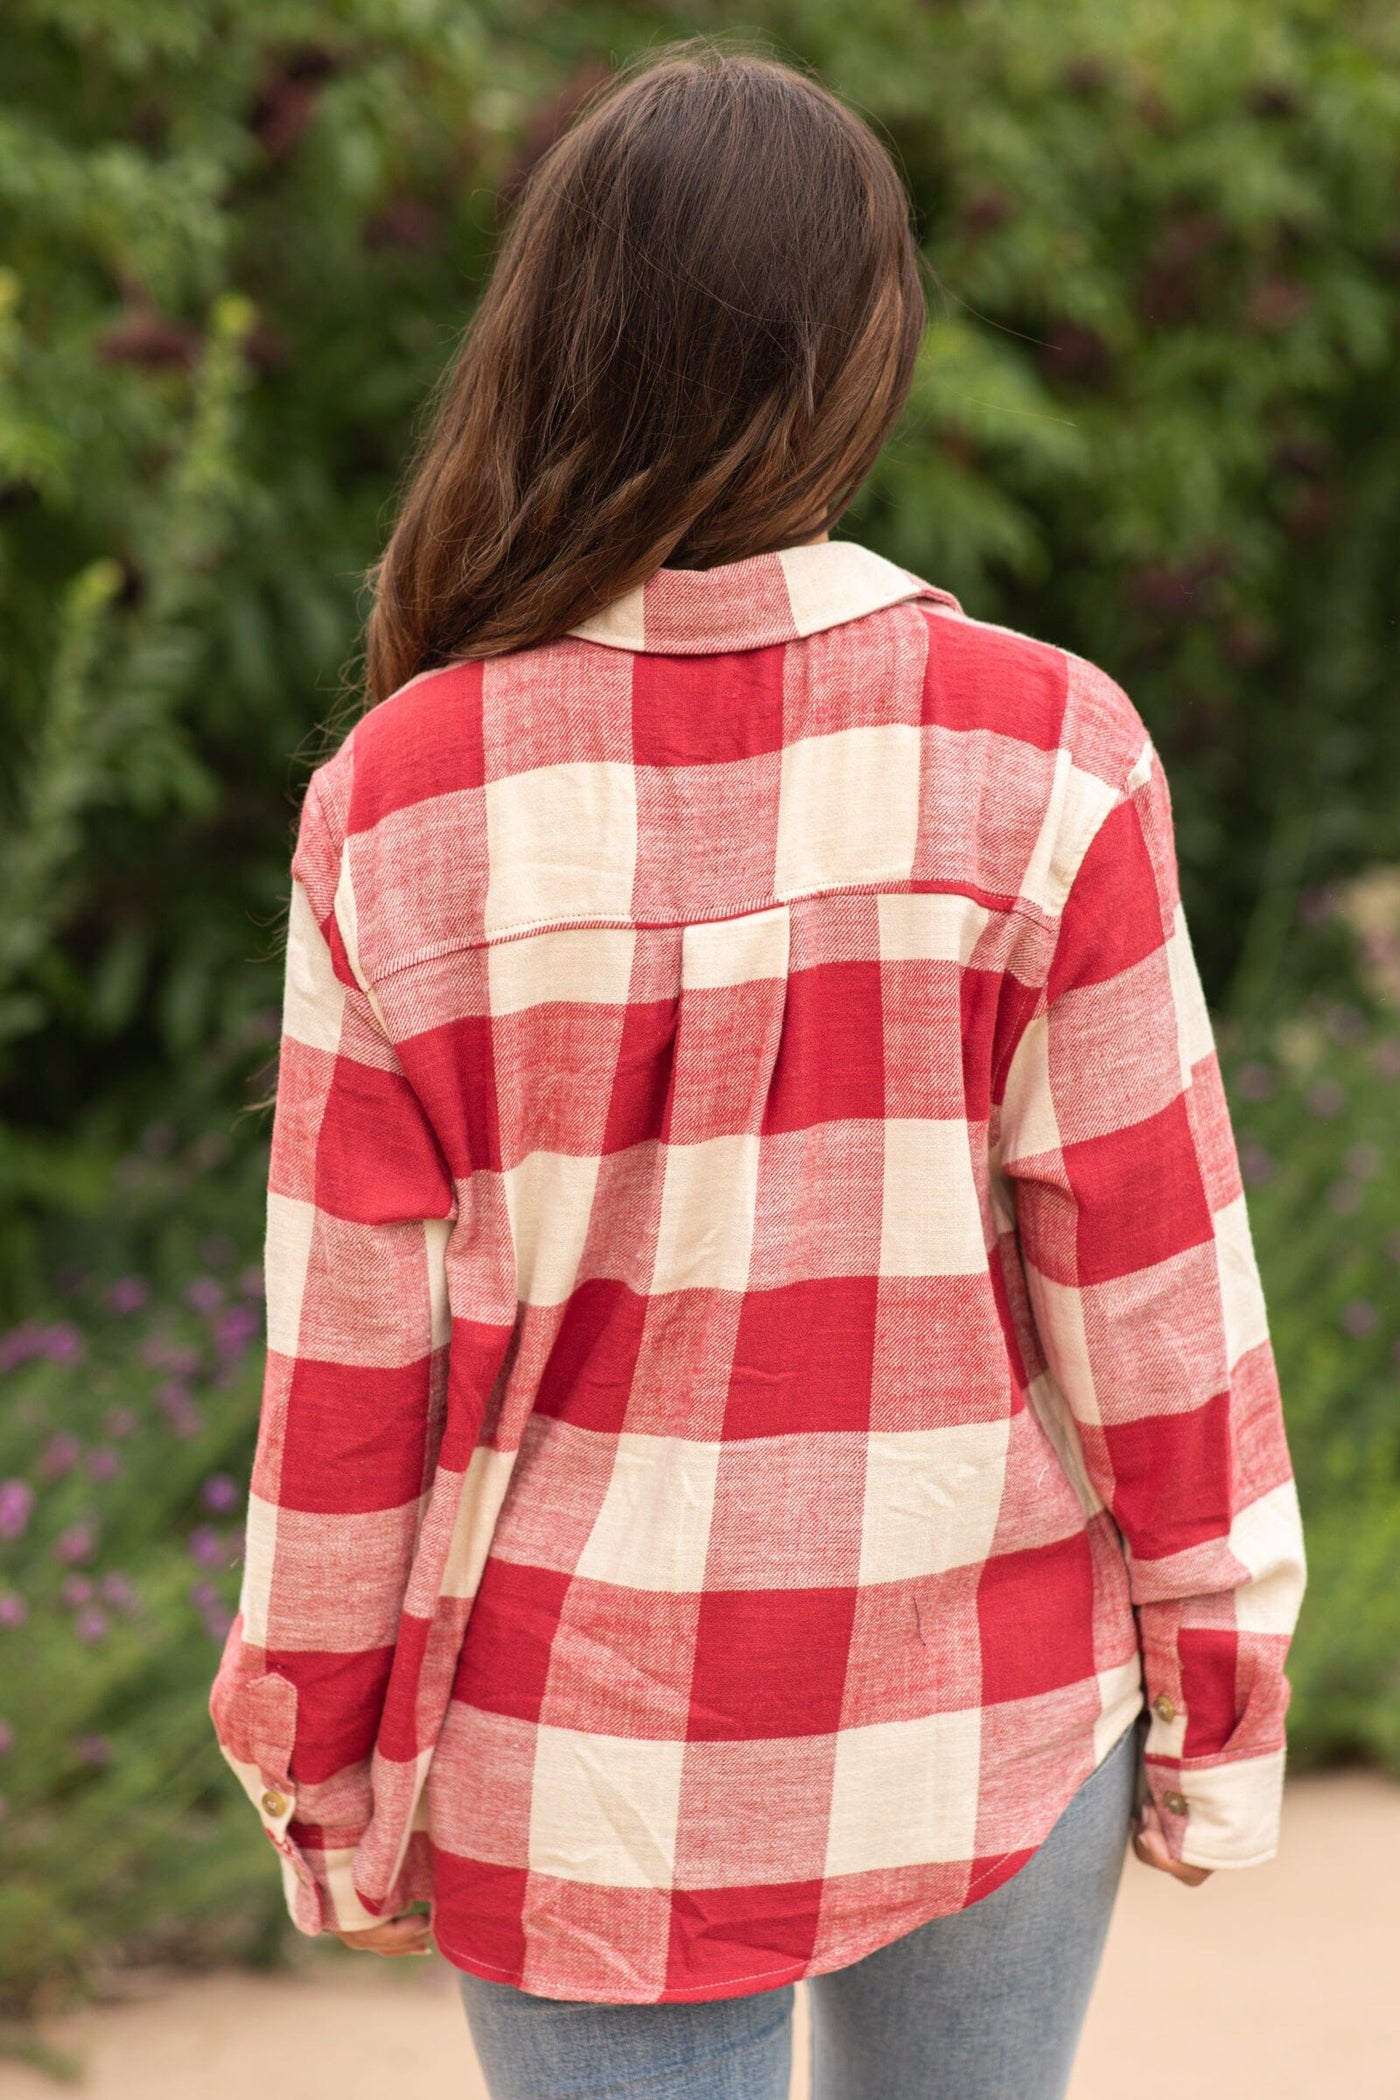 Dark Red and Beige Plaid Button Up Top - Filly Flair